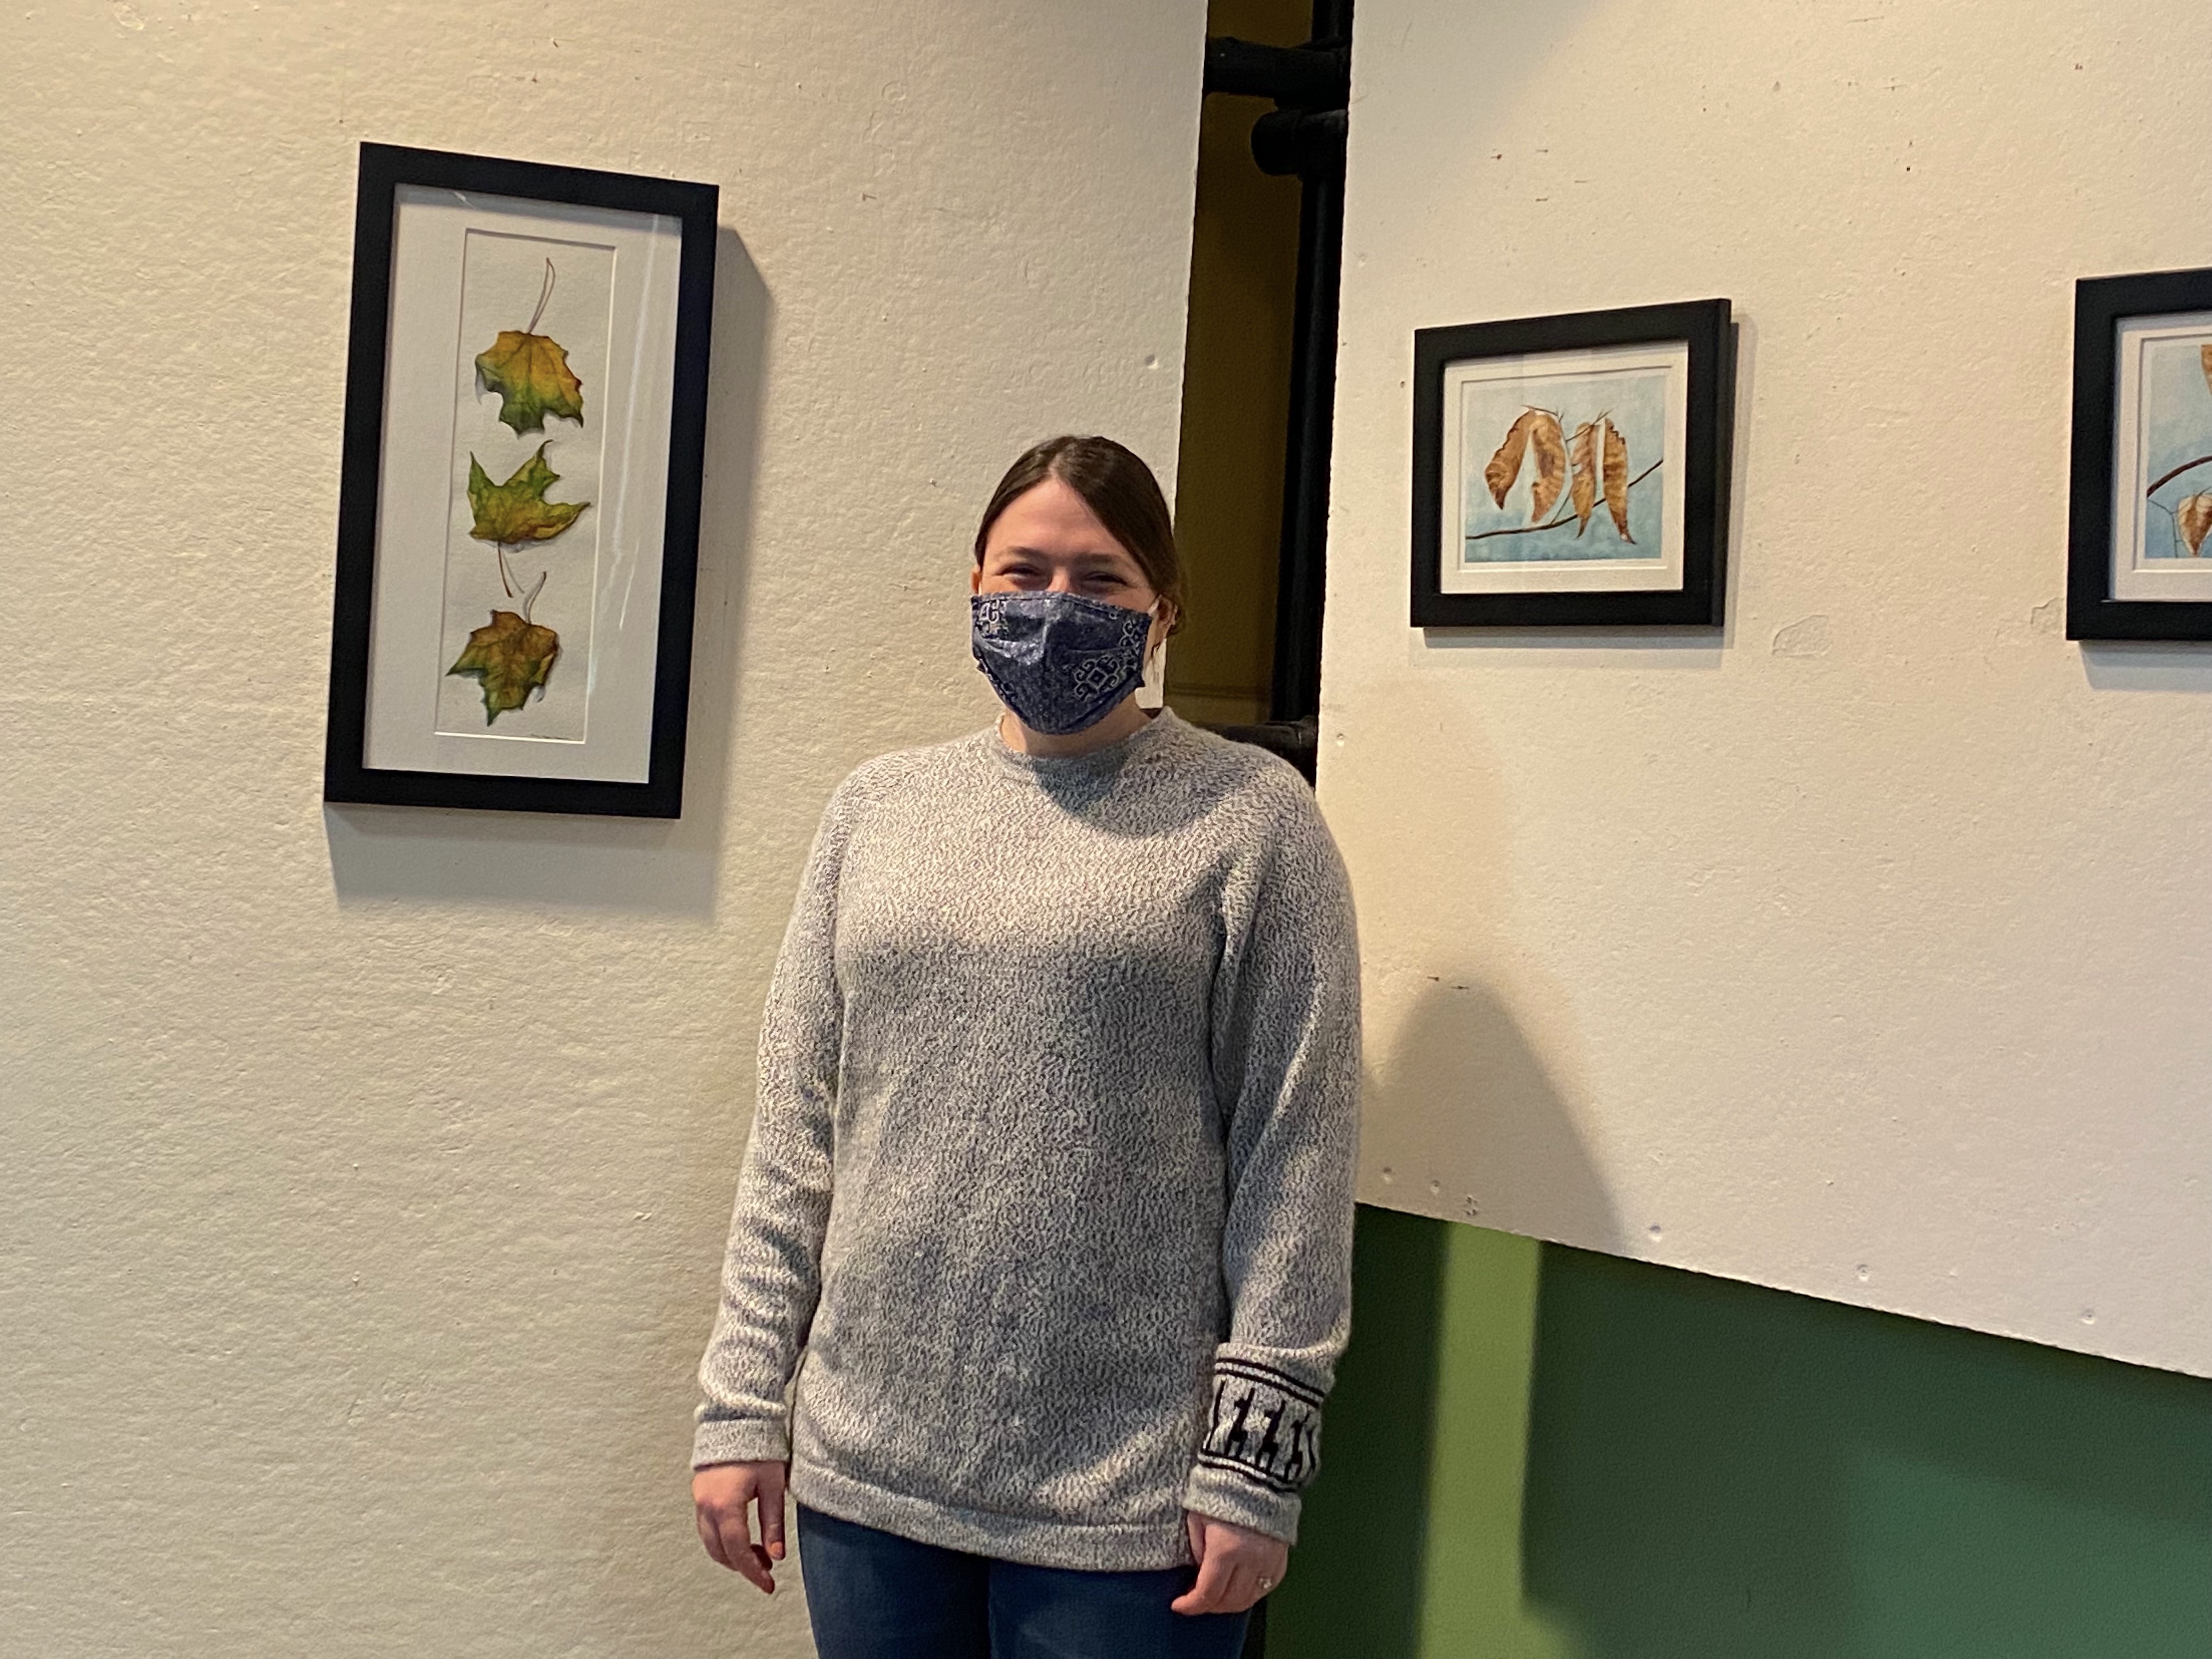 Artist Amy Hook Therrien poses for the camera, between two different display panels each with one painting hung vertically, after installing her artwork in LNT's Gallery space.